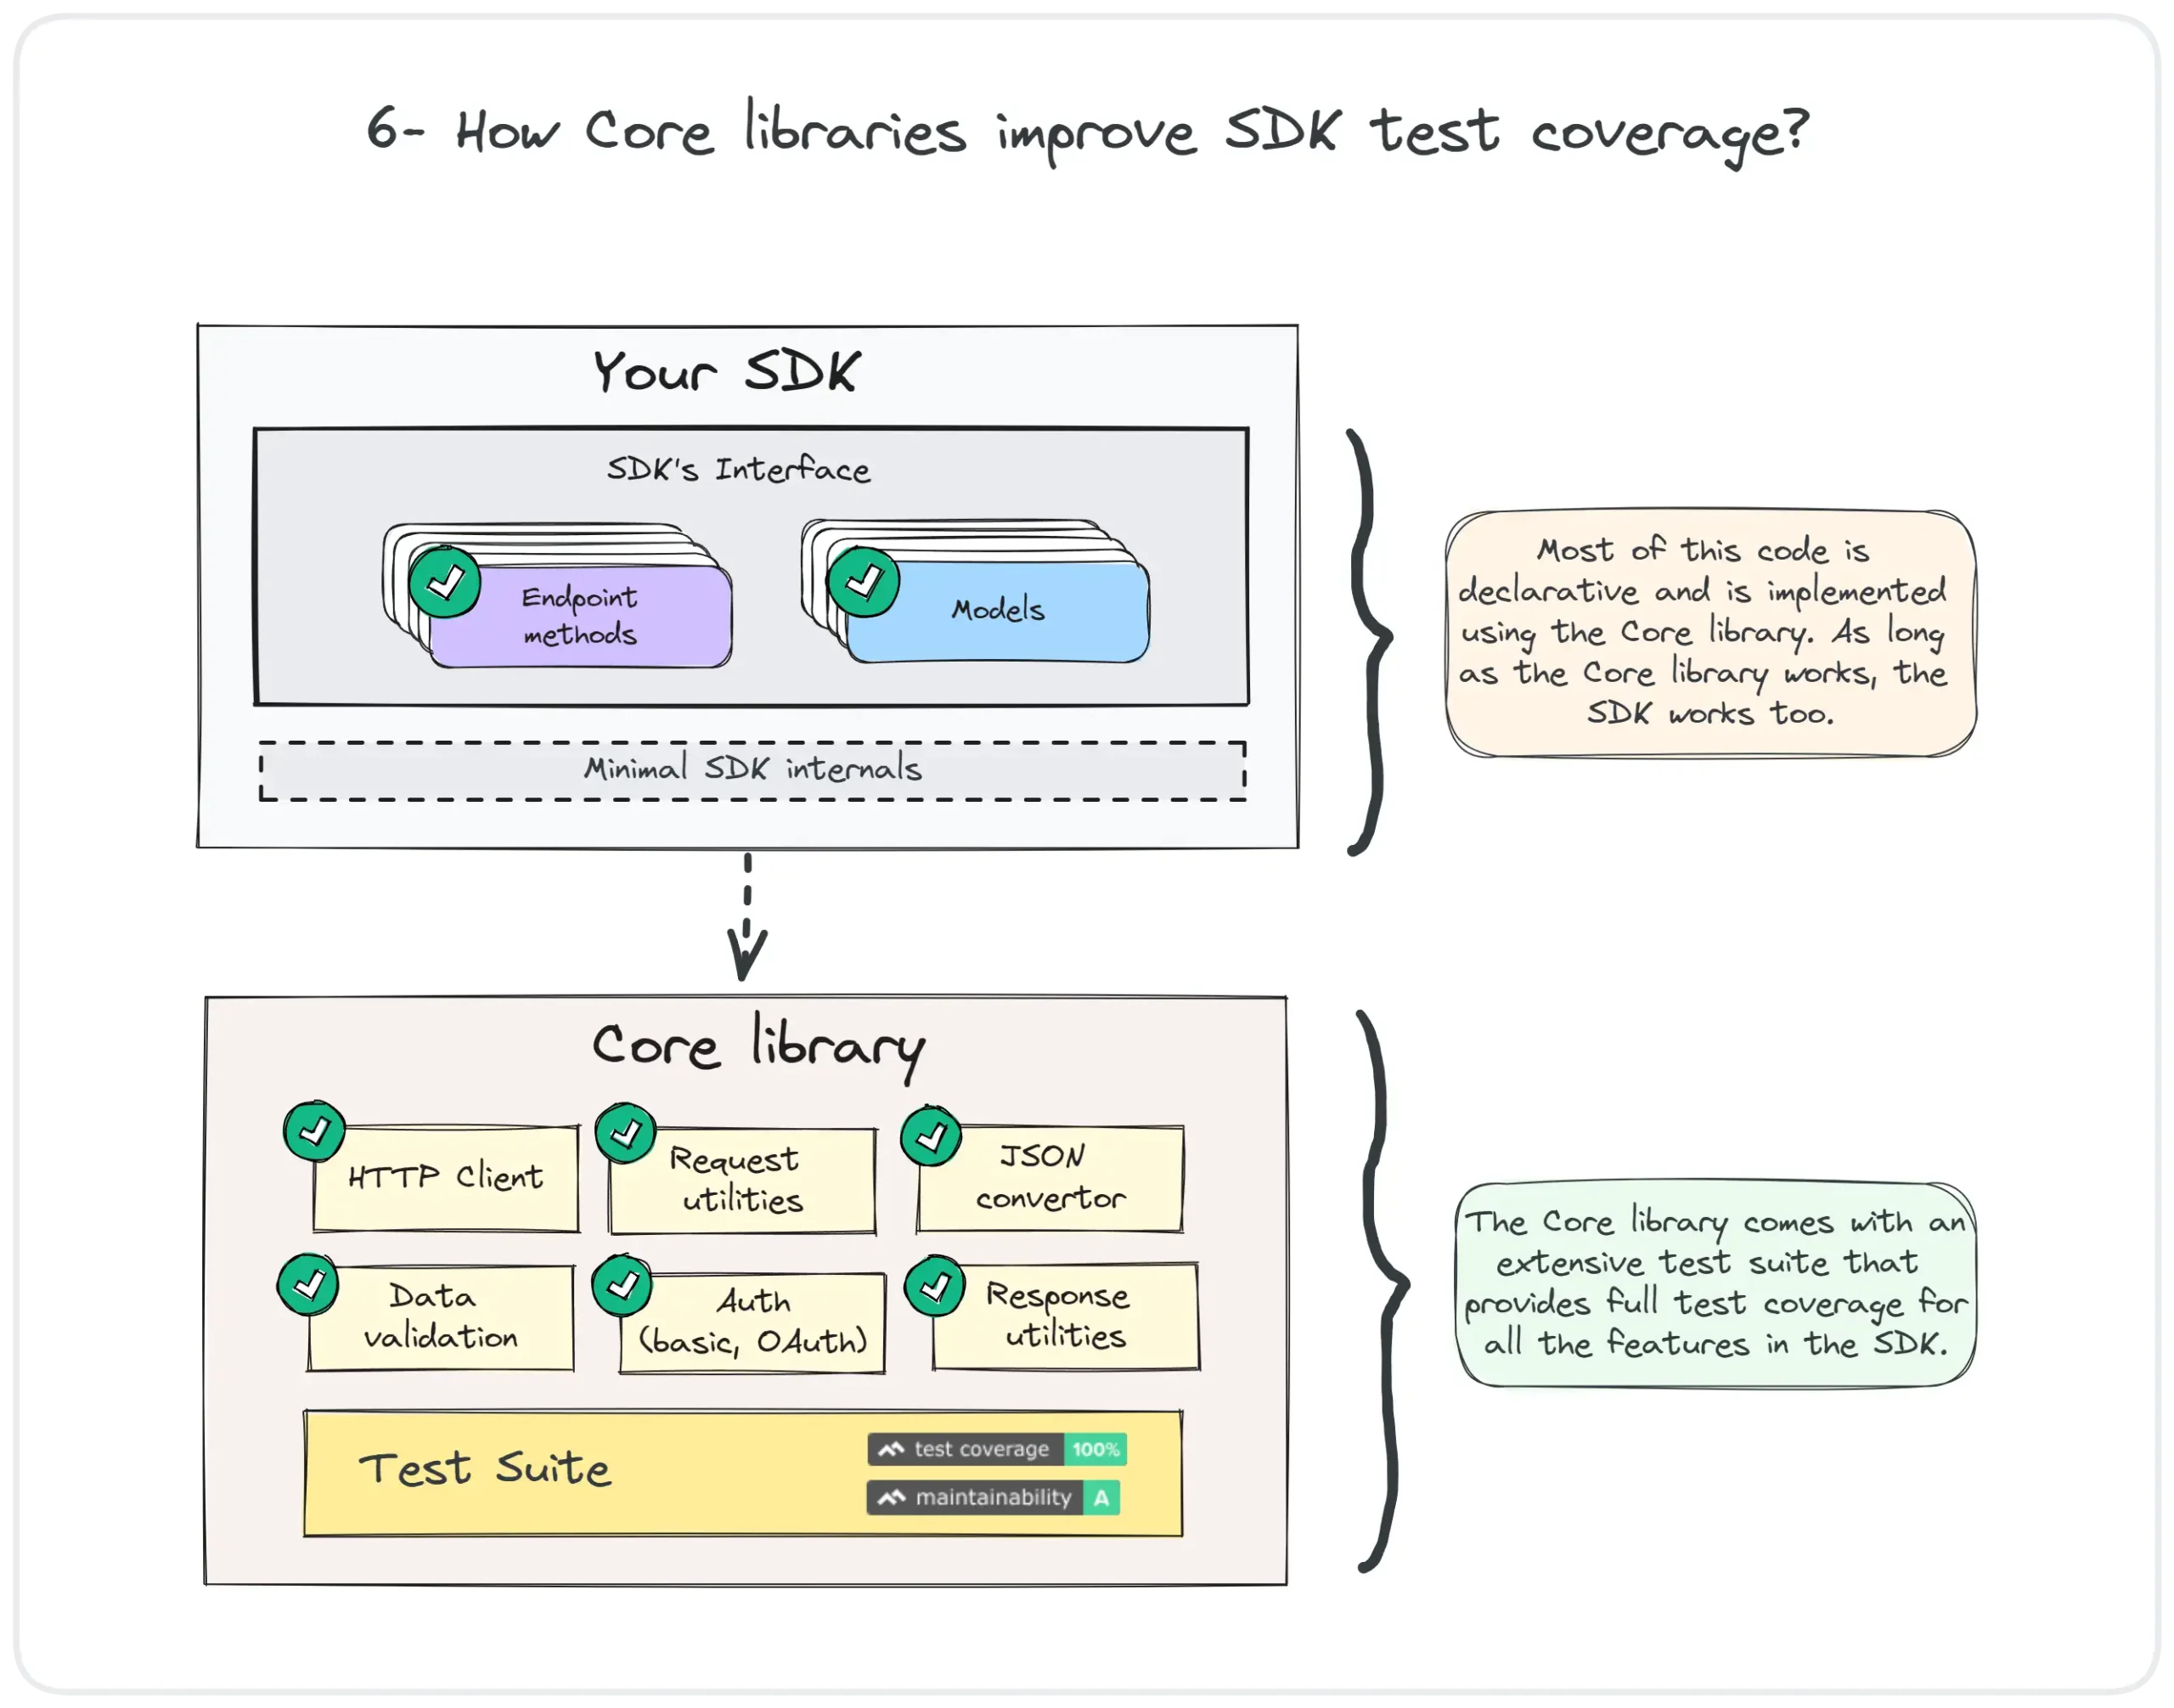 How Core libraries improve SDK test coverage?